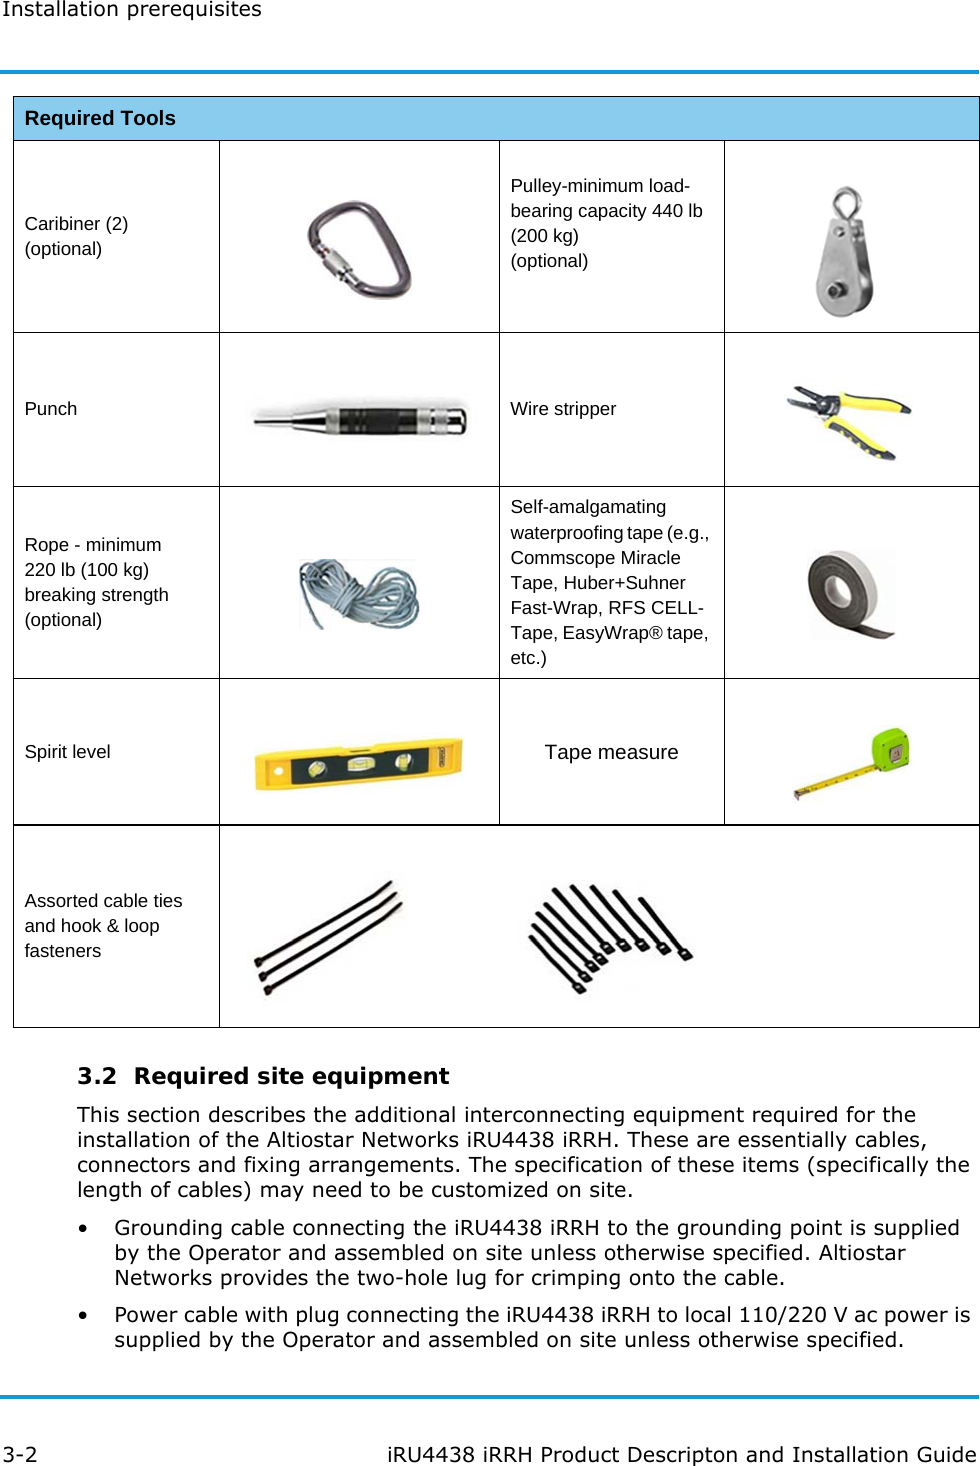 Installation prerequisites3-2 iRU4438 iRRH Product Descripton and Installation Guide3.2  Required site equipmentThis section describes the additional interconnecting equipment required for the installation of the Altiostar Networks iRU4438 iRRH. These are essentially cables, connectors and fixing arrangements. The specification of these items (specifically the length of cables) may need to be customized on site.• Grounding cable connecting the iRU4438 iRRH to the grounding point is supplied by the Operator and assembled on site unless otherwise specified. Altiostar Networks provides the two-hole lug for crimping onto the cable.• Power cable with plug connecting the iRU4438 iRRH to local 110/220 V ac power is supplied by the Operator and assembled on site unless otherwise specified. Caribiner (2) (optional)Pulley-minimum load-bearing capacity 440 lb (200 kg) (optional)Punch Wire stripperRope - minimum220 lb (100 kg) breaking strength (optional)Self-amalgamating waterproofing tape (e.g., Commscope Miracle Tape, Huber+Suhner Fast-Wrap, RFS CELL-Tape, EasyWrap® tape, etc.)Spirit level Tape measureAssorted cable ties and hook &amp; loop fastenersRequired Tools